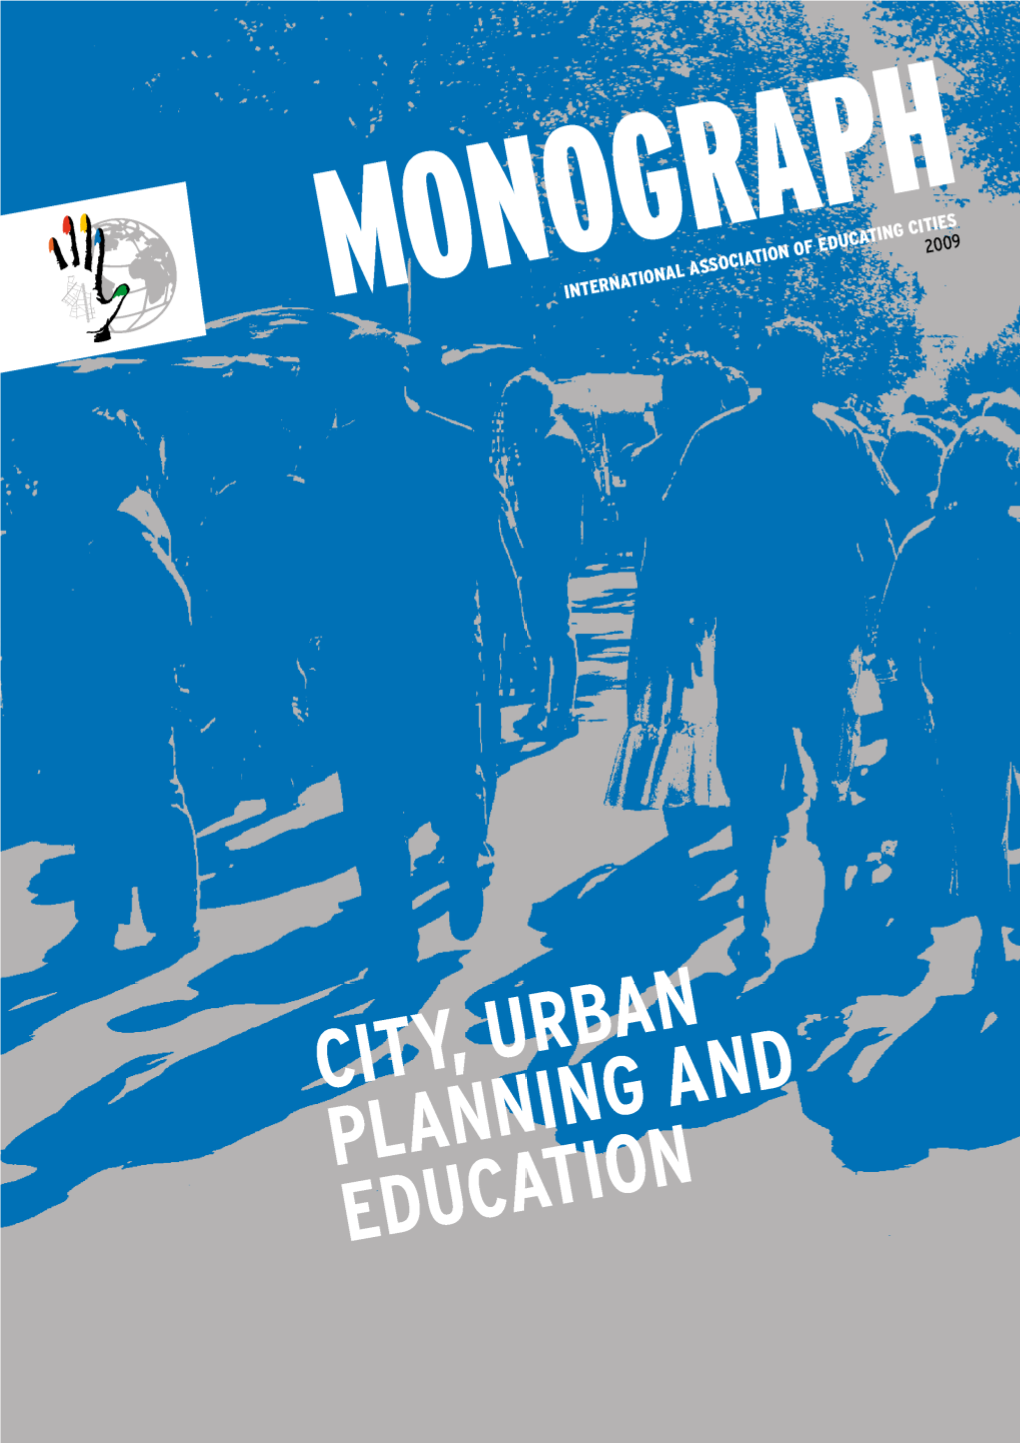 CITY, URBAN PLANNING and EDUCATION Foreword CITY, URBAN PLANNING ANDMONOGRAPH EDUCATION